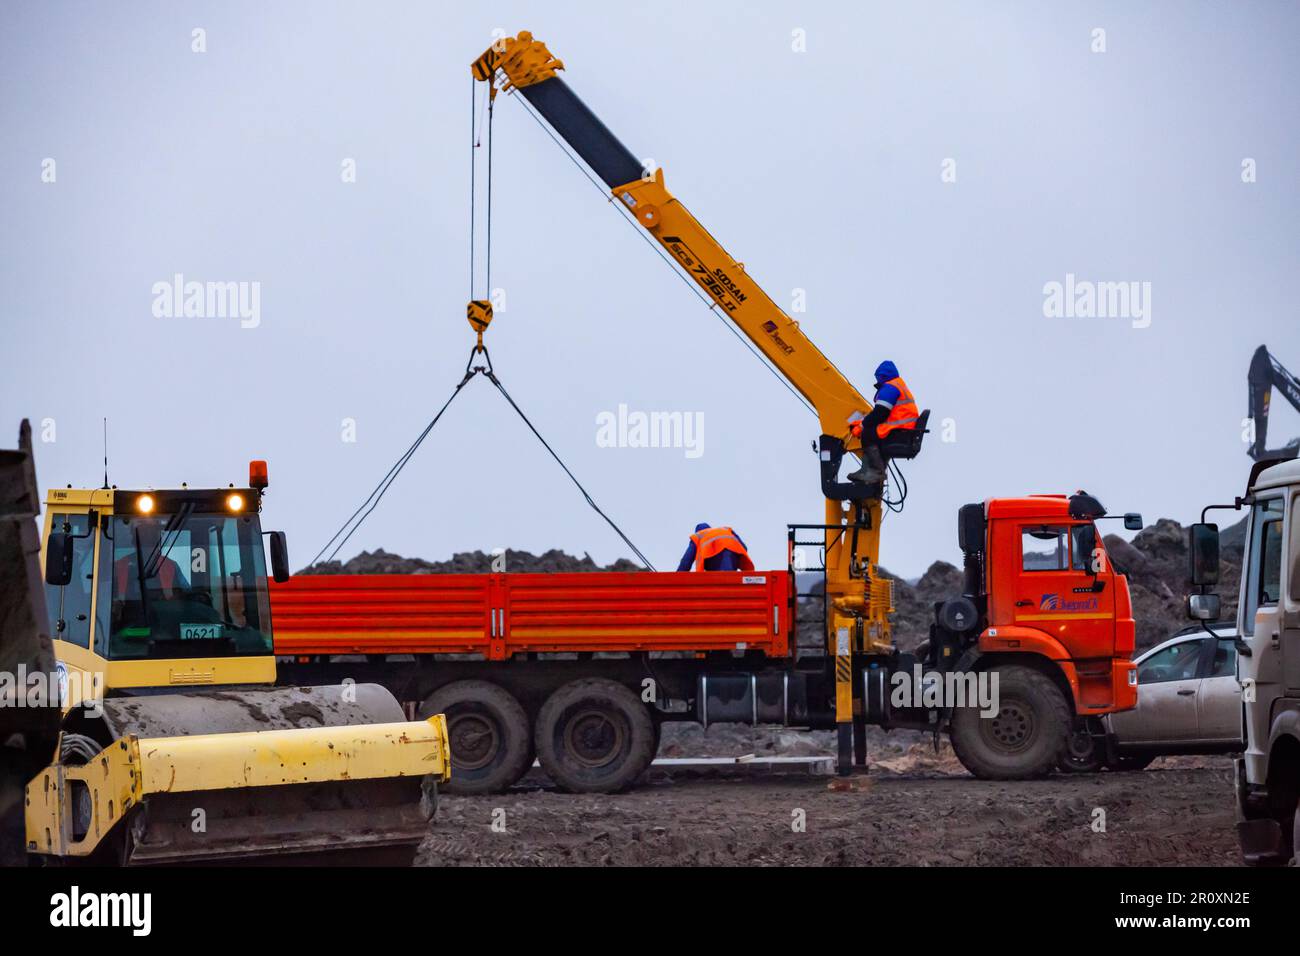 Ust-Luga, Leningrad oblast, Russia - November 16, 2021: Workers unloads concrete plates from truck Stock Photo